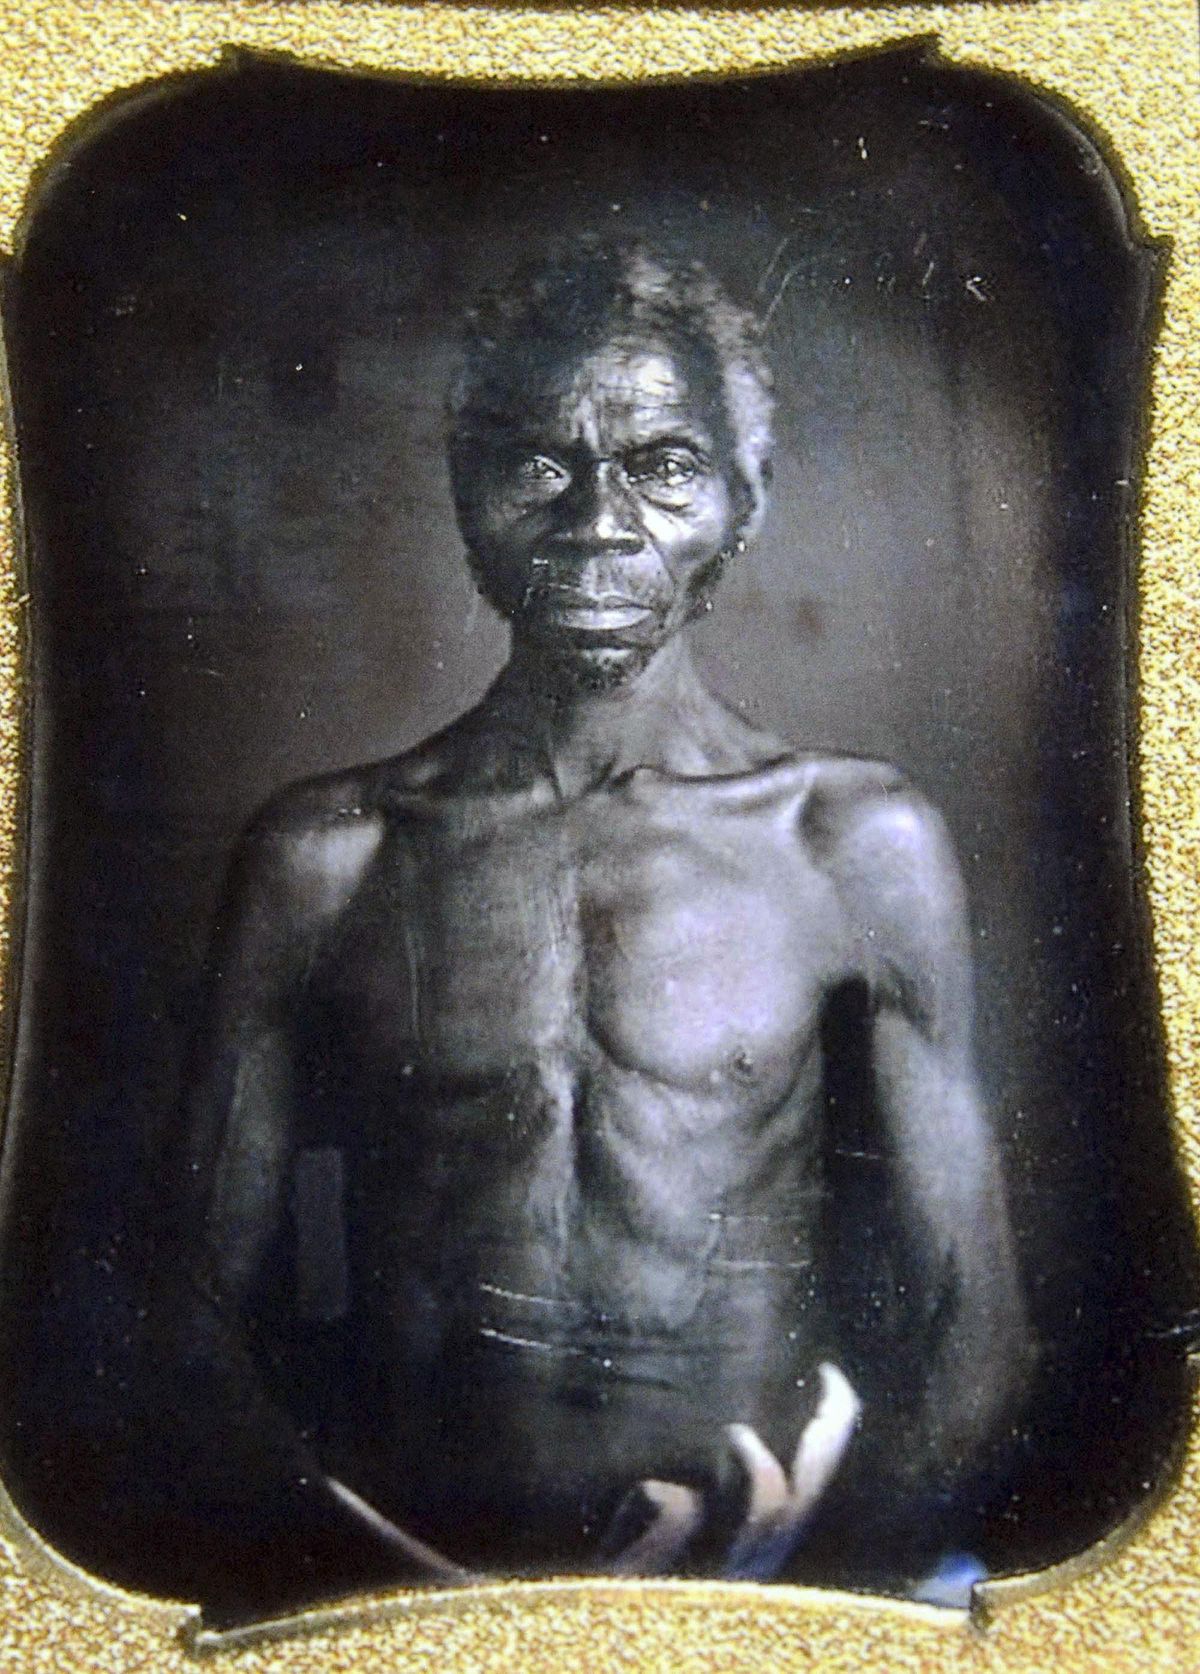 This July 17, 2018 copy of a photo shows a 1850 Daguerreotype of Renty, a South Carolina slave who Tamara Lanier, of Norwich, Conn., said is her family’s patriarch. The portrait was commissioned by Harvard biologist Louis Agassiz, whose ideas were used to support the enslavement of Africans in the United States. Lanier filed a lawsuit on Wednesday, March 20, 2019, in Massachusetts state court, demanding that Harvard turn over the photo and pay damages. (John Shishmanian / AP)